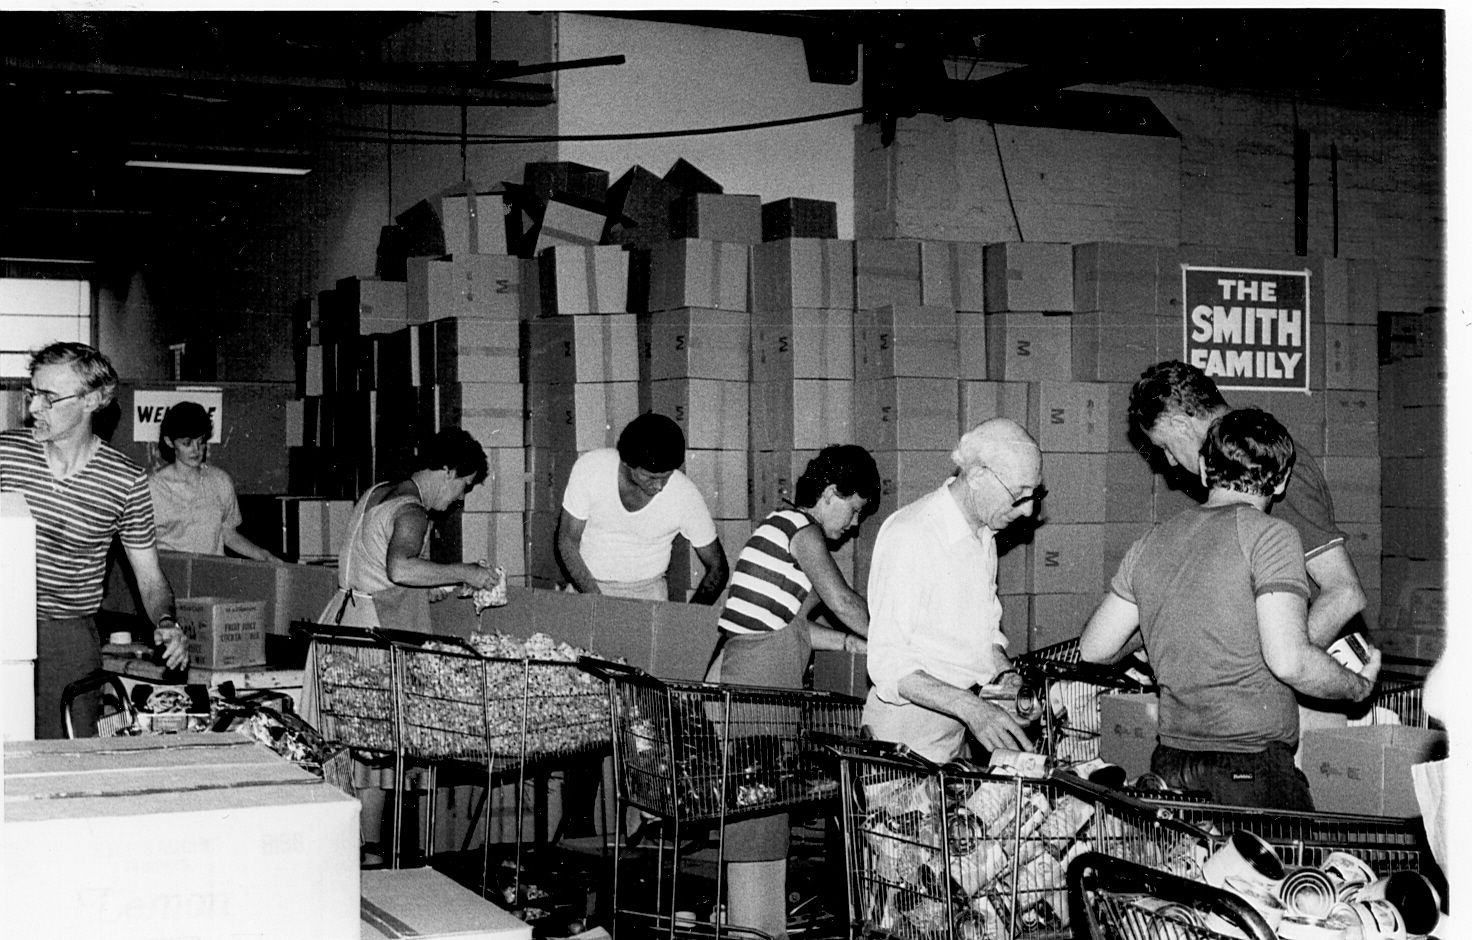 FJ Sydney Staff pack Christmas parcels for the Smith Family.  Photo: Jones Family Collection 